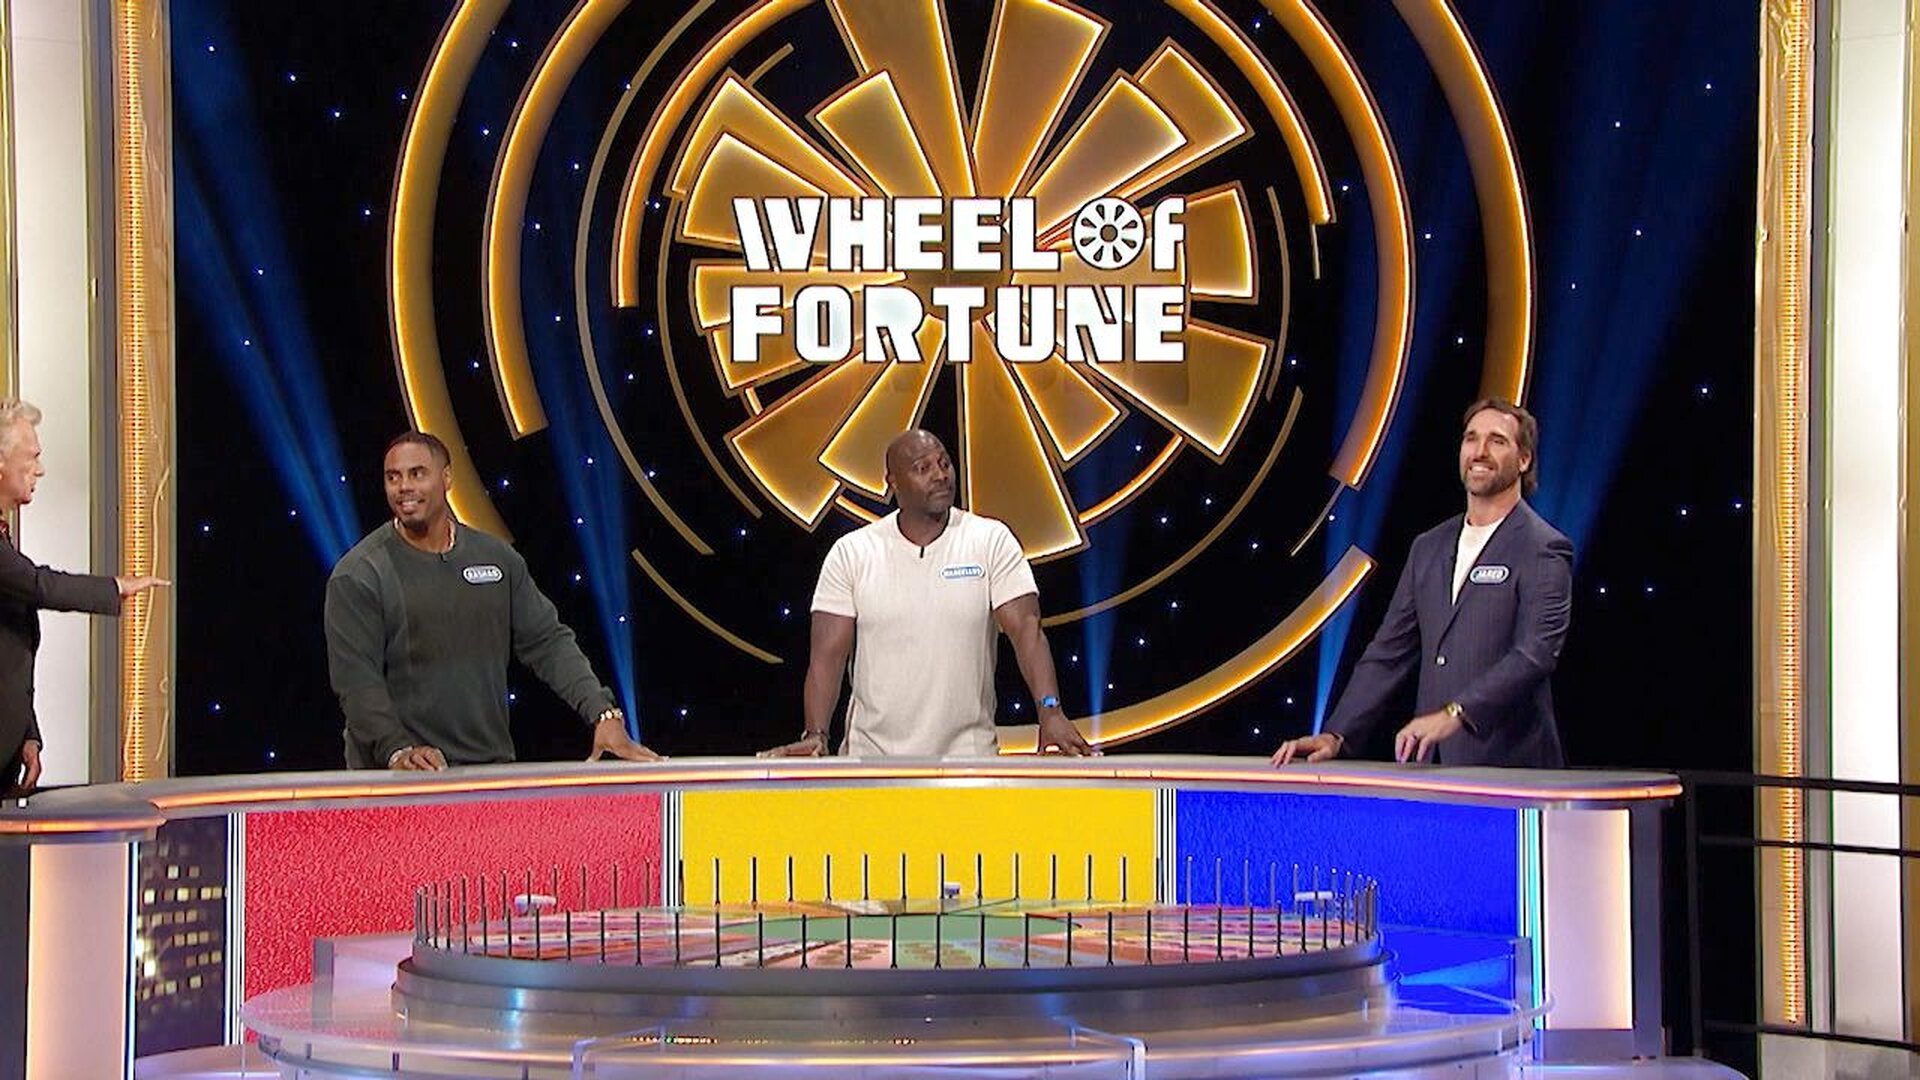 Rashad Jennings, Marcellus Wiley and Jared Allen Celebrity Wheel of